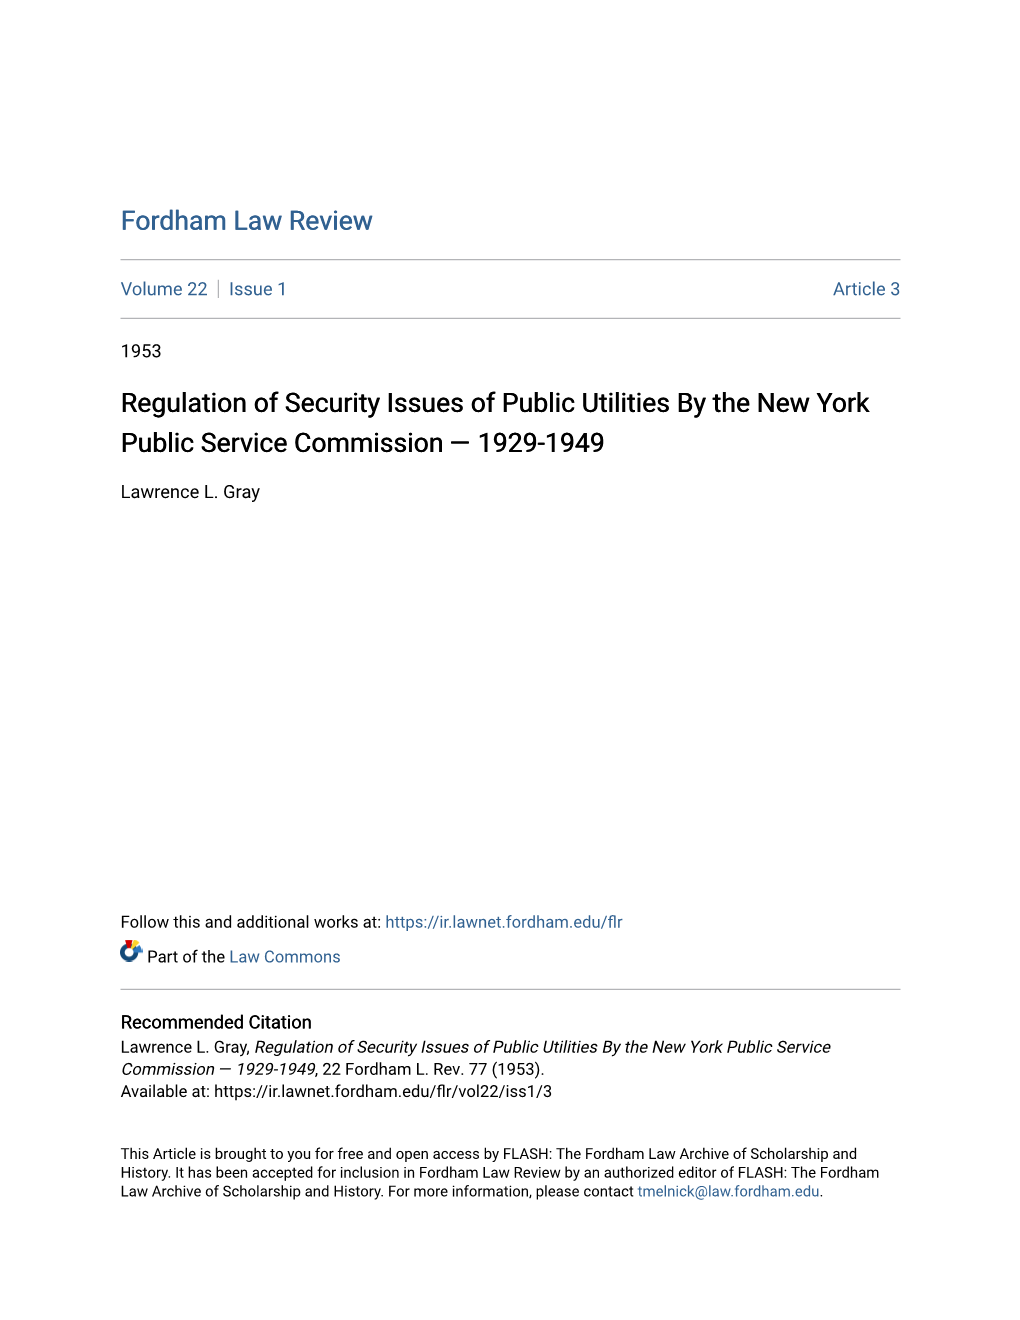 Regulation of Security Issues of Public Utilities by the New York Public Service Commission — 1929-1949